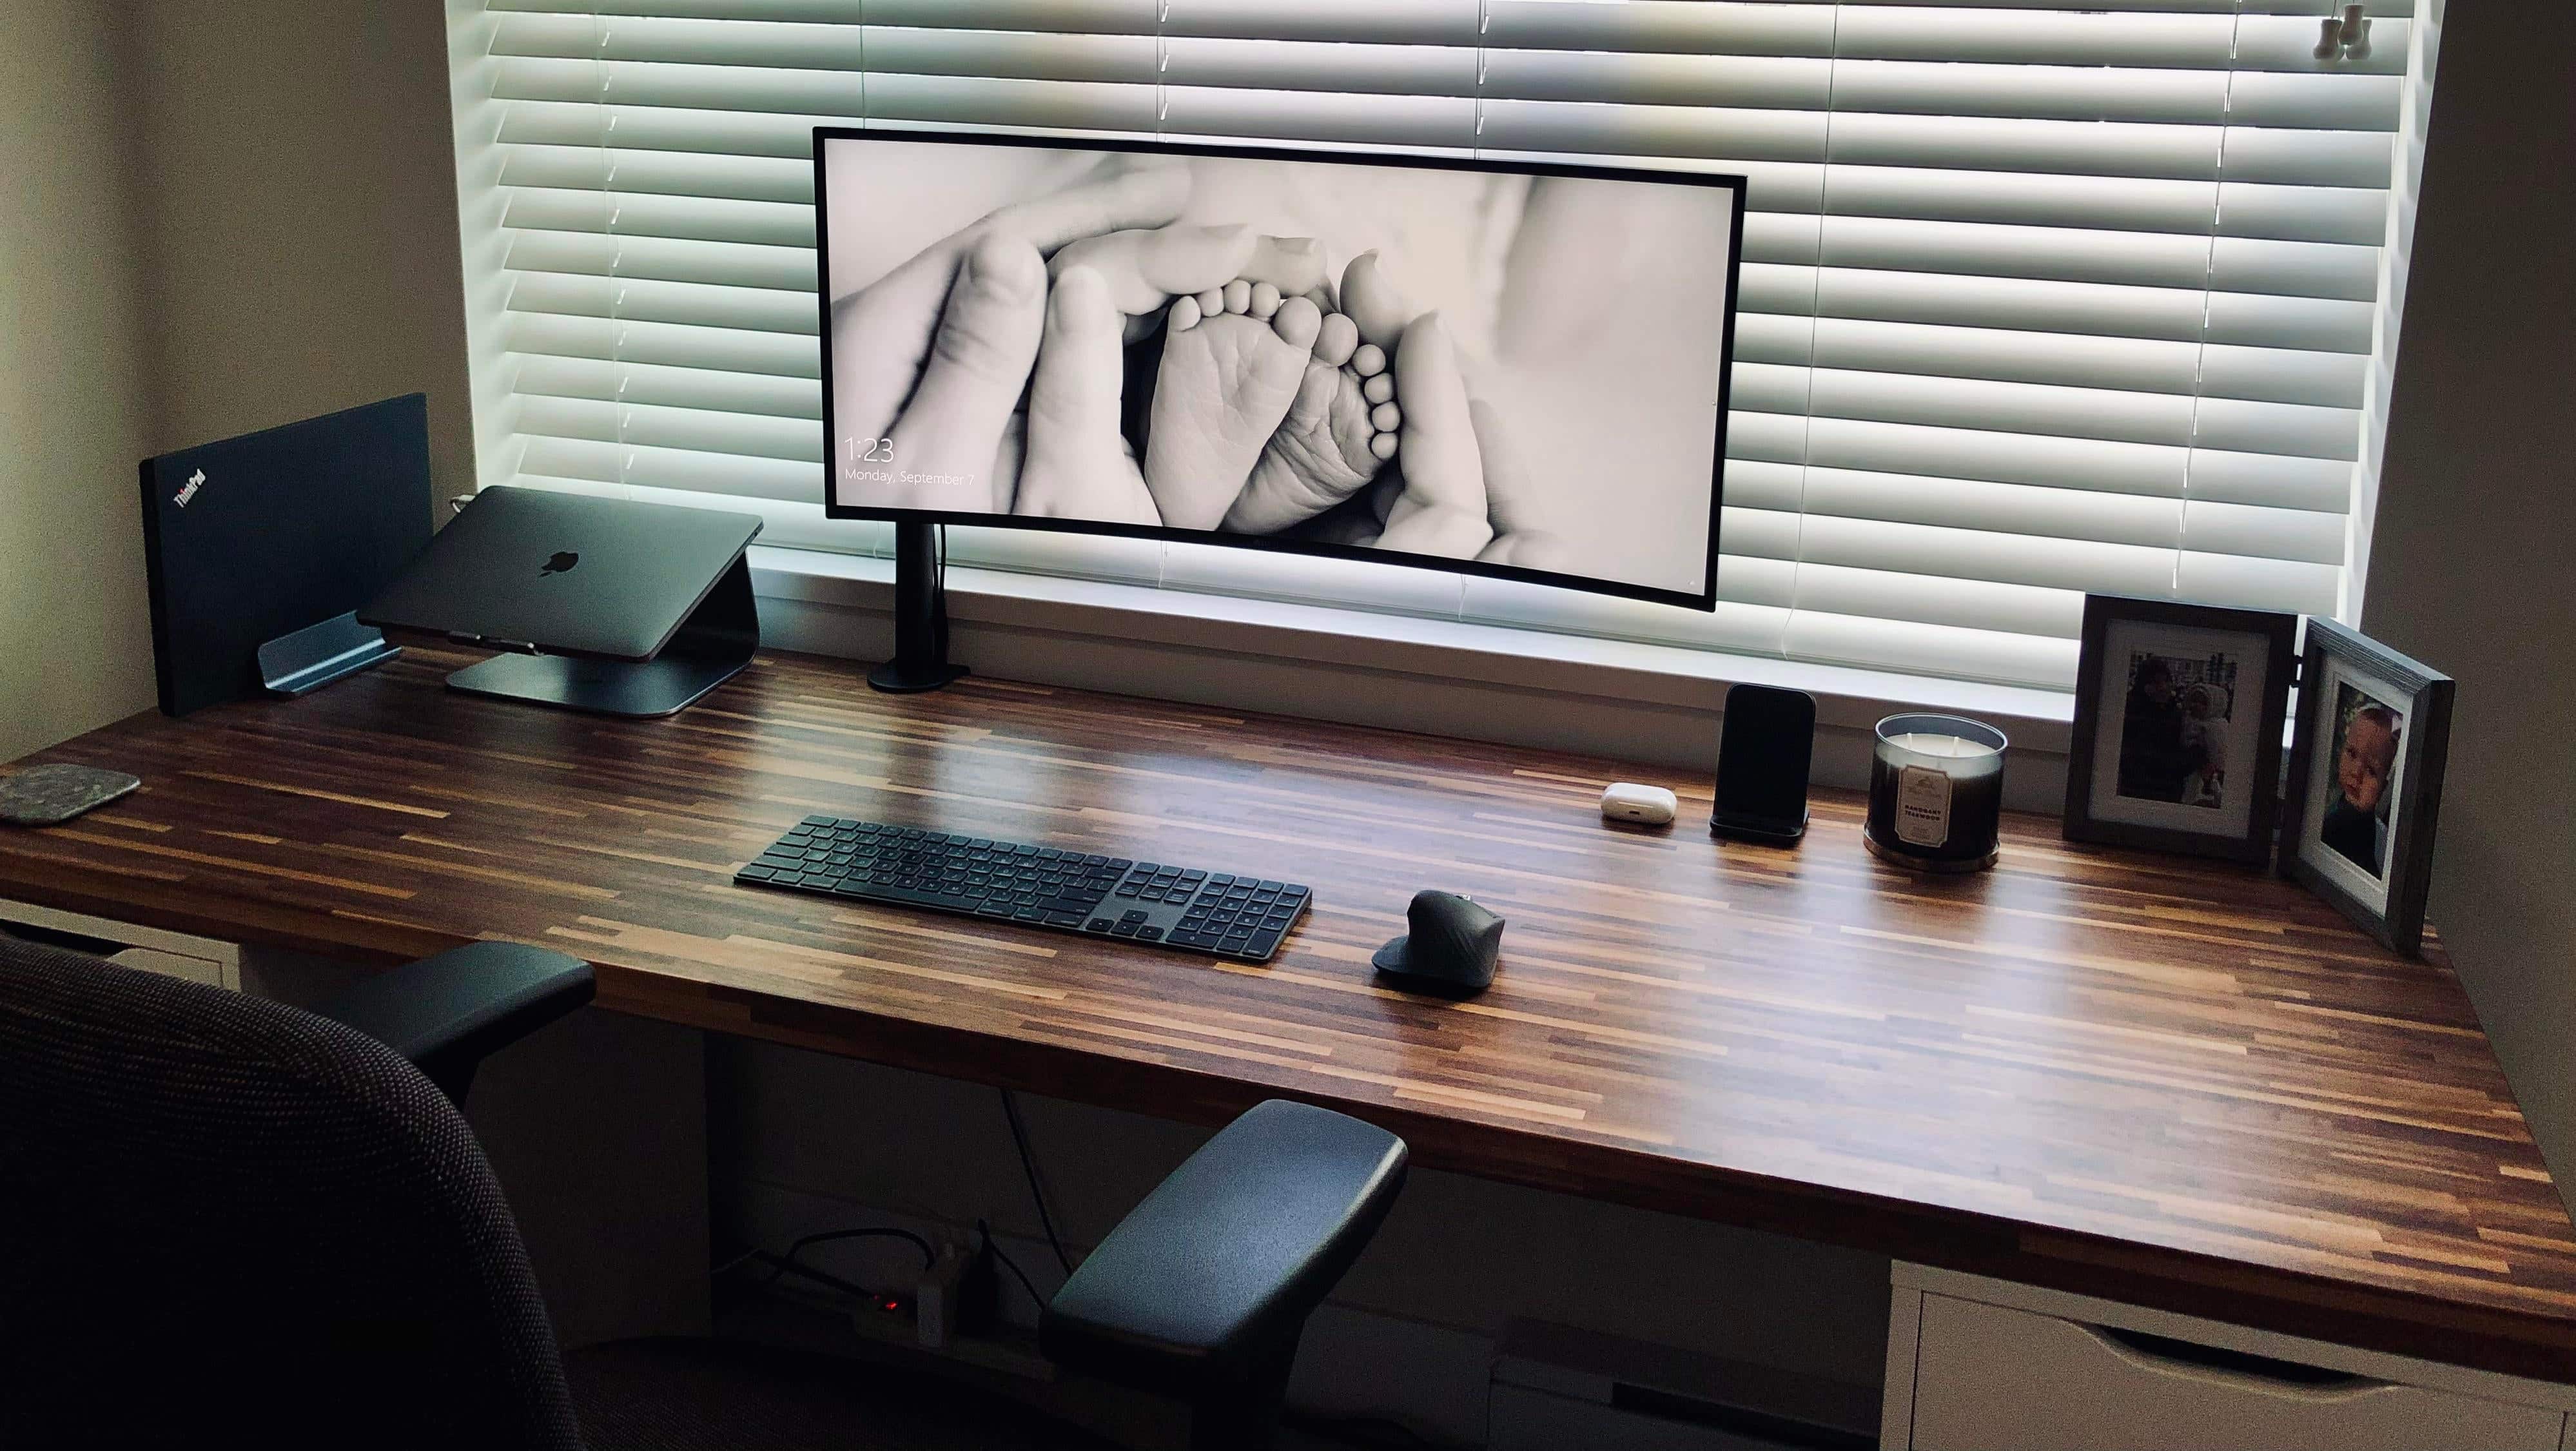 This desk has a minimalism level of over 9,000 [Setups] | Cult of Mac